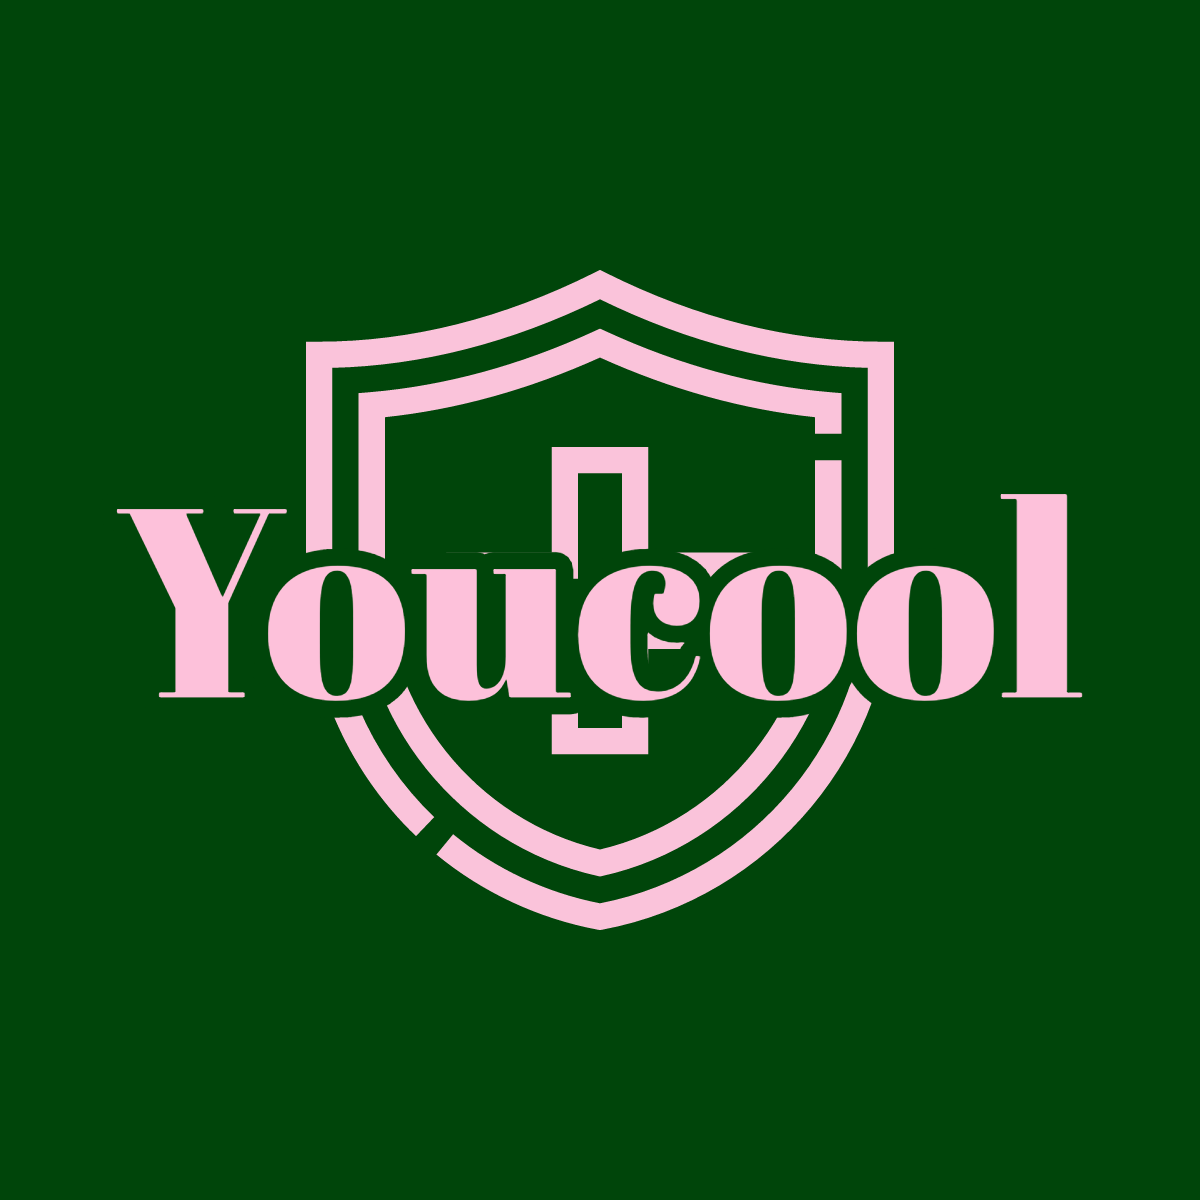 Youcool Production House Limited